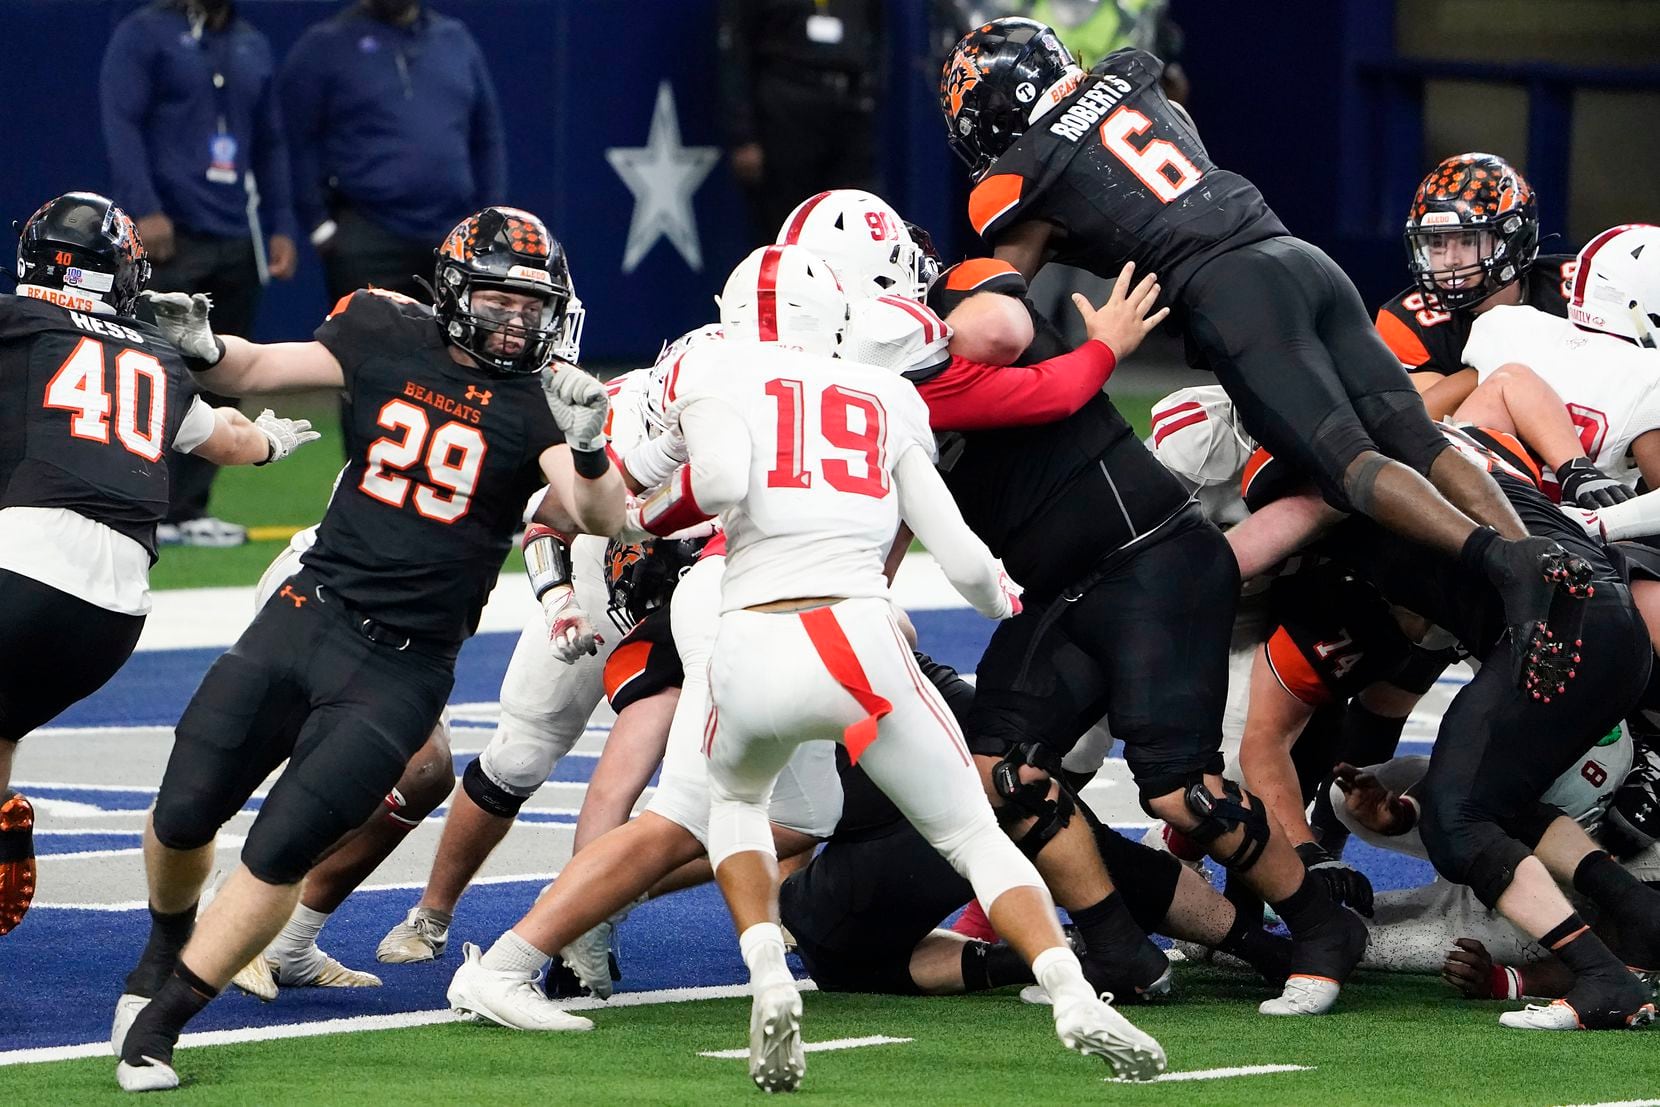 Aledo running back DeMarco Roberts (6) dives over the pile for a touchdown during the second half of a 56-21 victory over Crosby to win the Class 5A Division II state football championship game at AT&T Stadium on Friday, Jan. 15, 2021, in Arlington. The victory gave the Bearcats the 10th state championship in school history. (Smiley N. Pool/The Dallas Morning News)